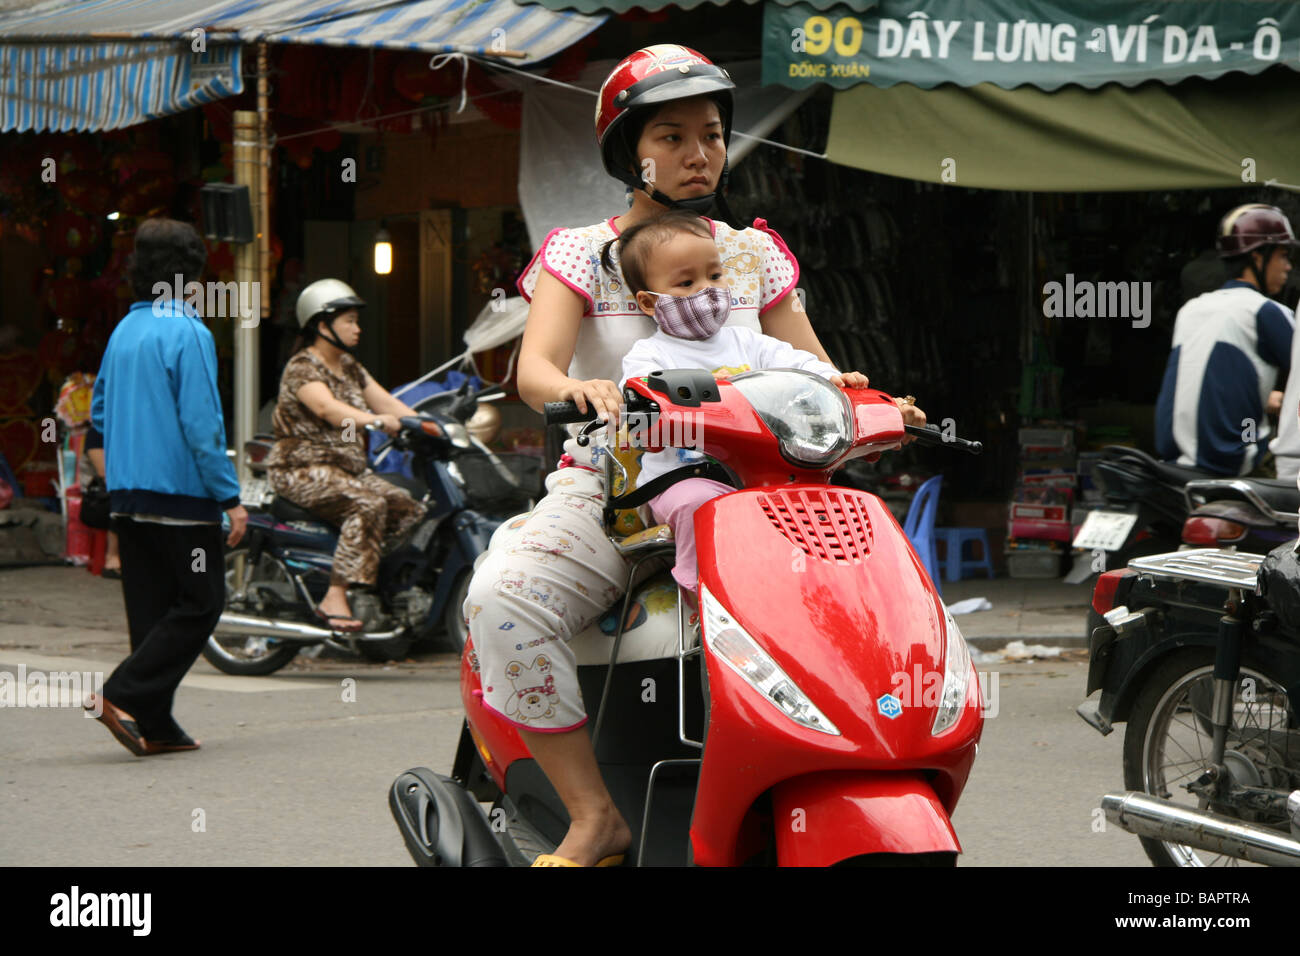 A masked baby on a moped with its mum in Hanoi, Vietnam Stock Photo